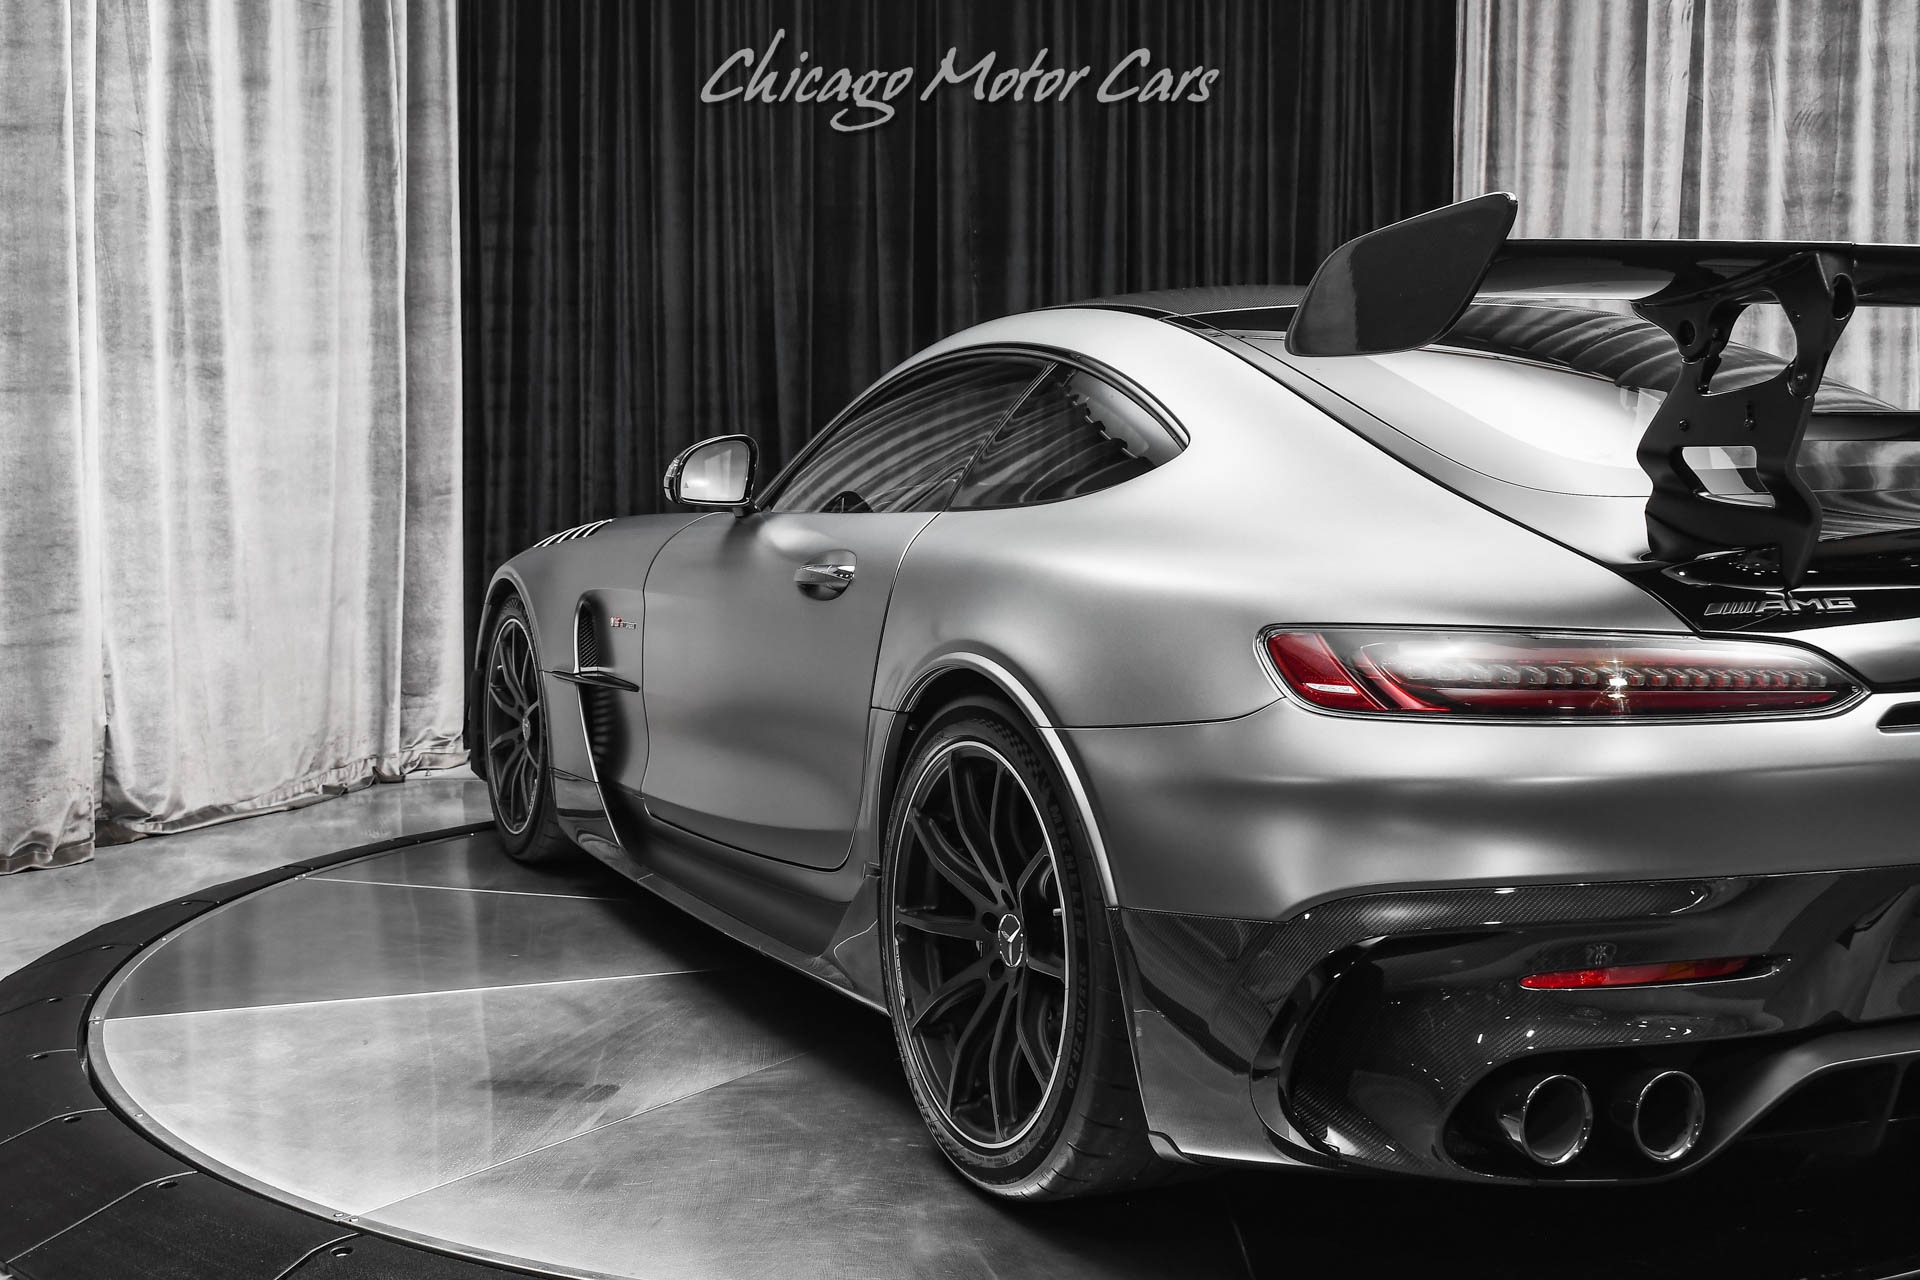 Used-2021-Mercedes-Benz-AMG-GT-BLACK-SERIES-Exterior-Carbon-Package-Burmester-Sound-RARE